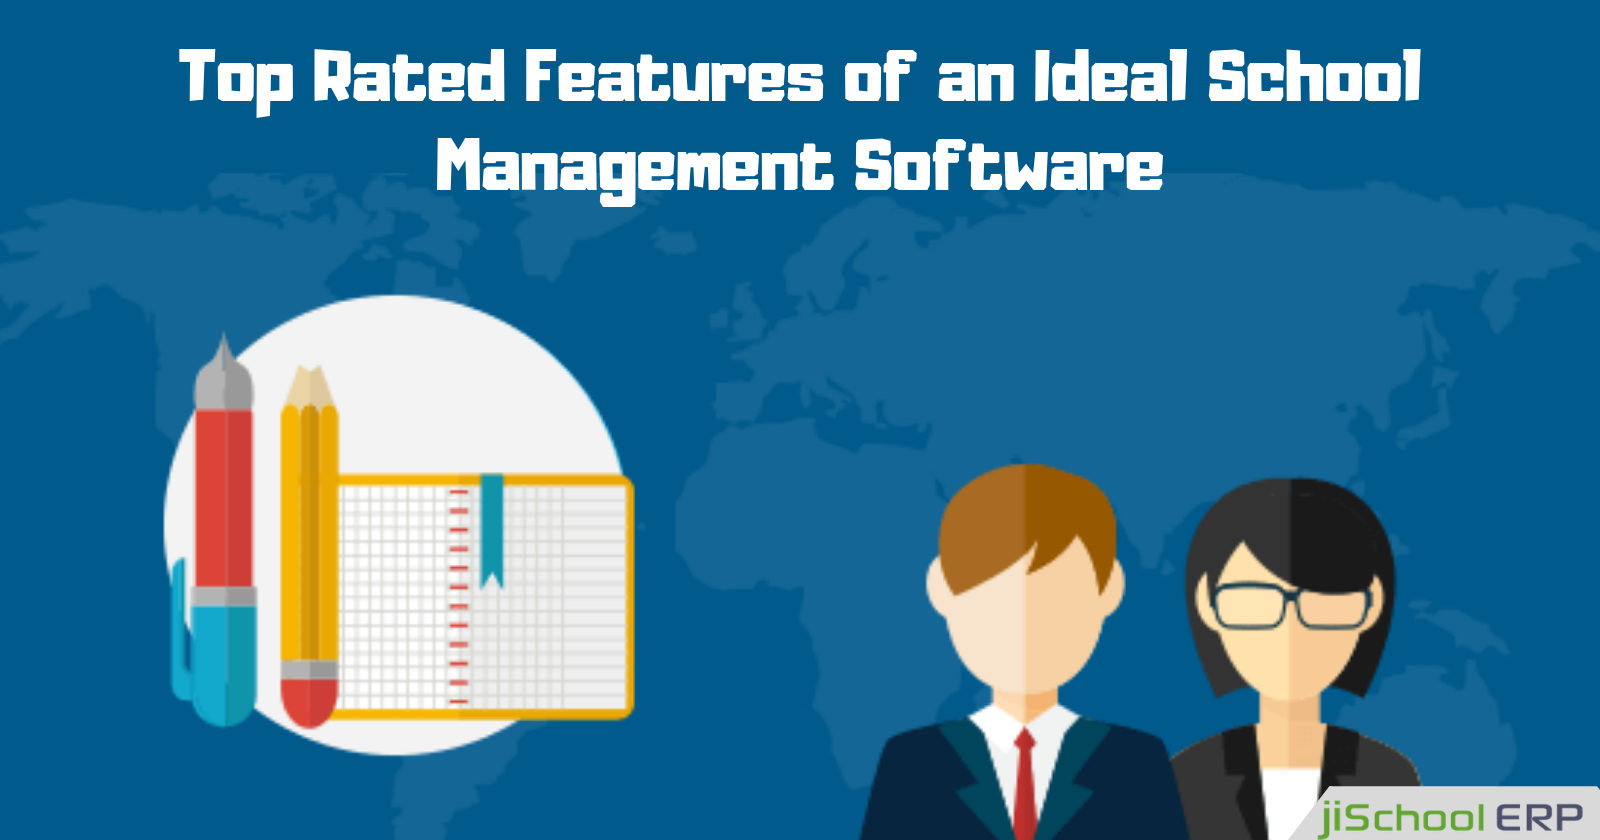 Know the Top Rated Features of an Ideal School Management Software